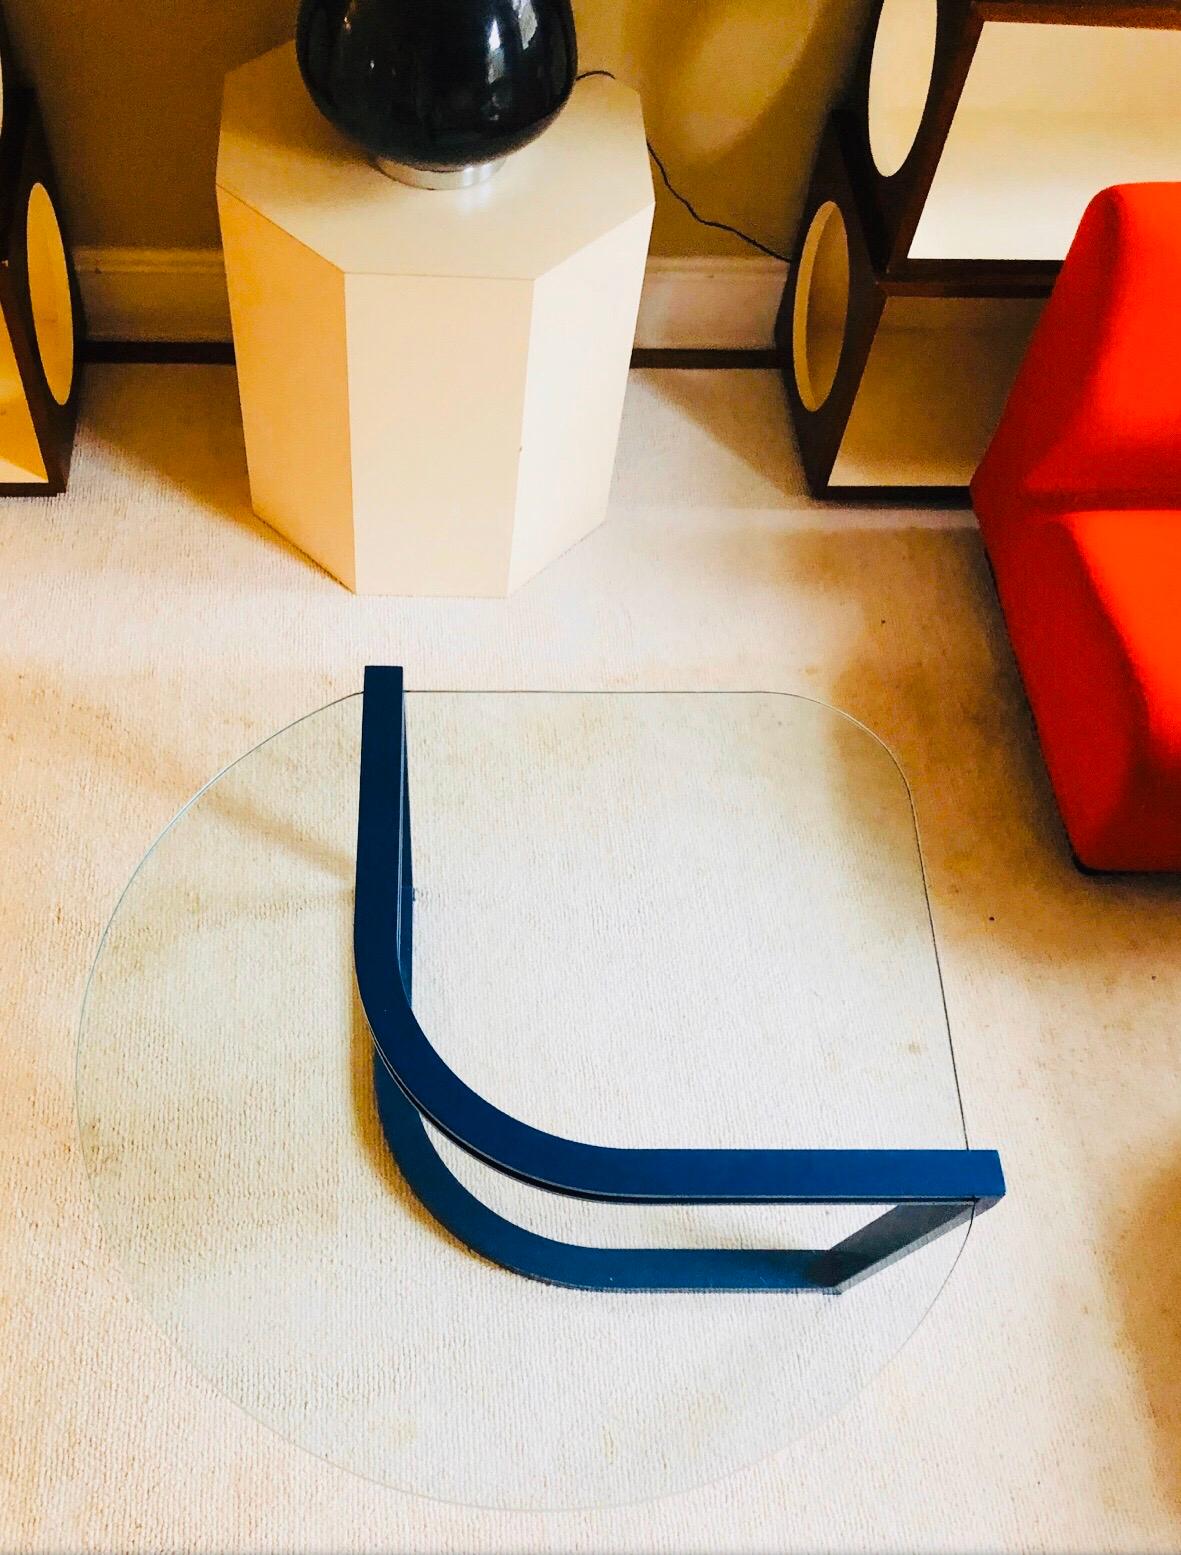 Fantastic Postmodern table by DIA. 

This piece is really a feat of dynamics, the glass slides into the blue flat bar base and stays suspended due to the placement of where the glass meets the metal. 

Makes a room pop!

Not recommended for homes